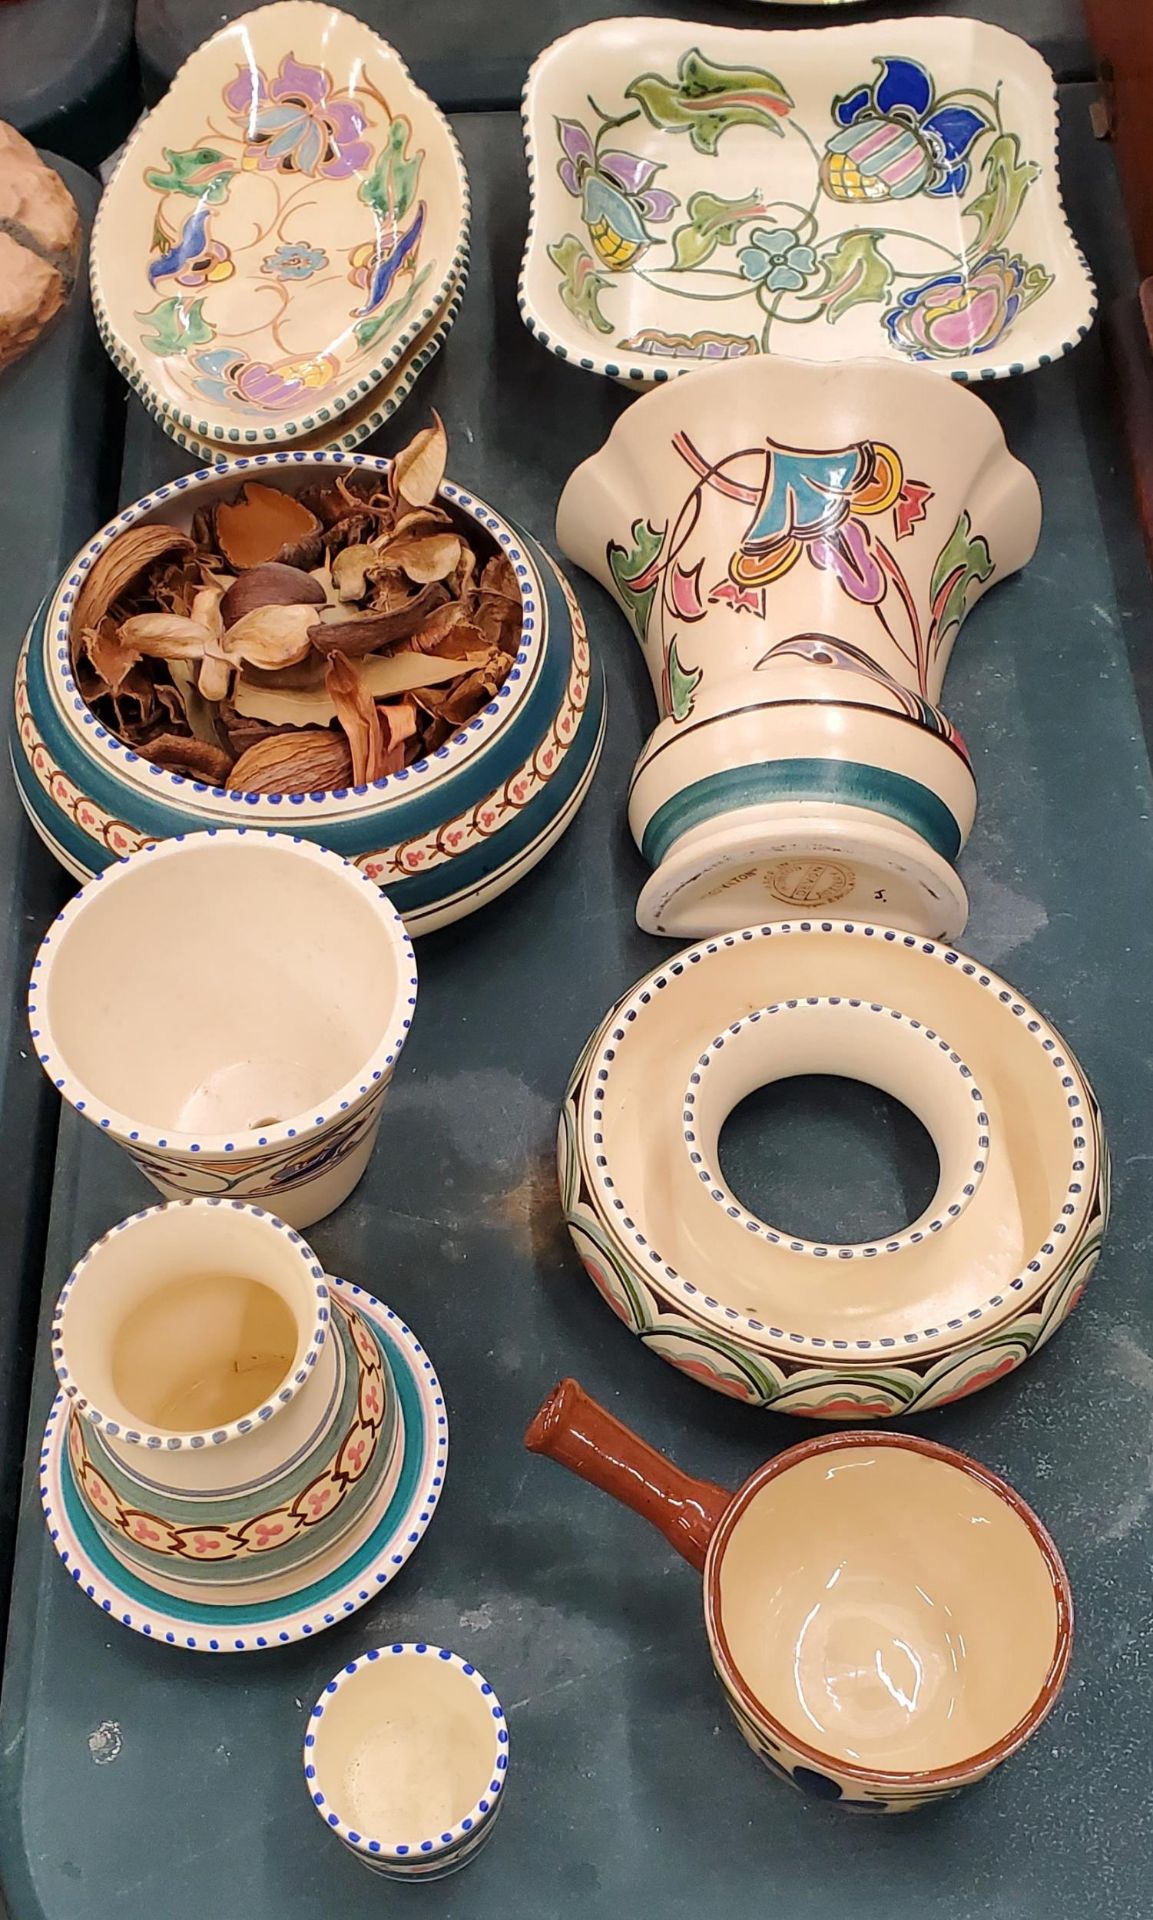 A COLLECTION OF HONITON DEVON POTTERY TO INCLUDE A WALL POCKET, VASES, BOWLS, ETC - 11 PIECES IN